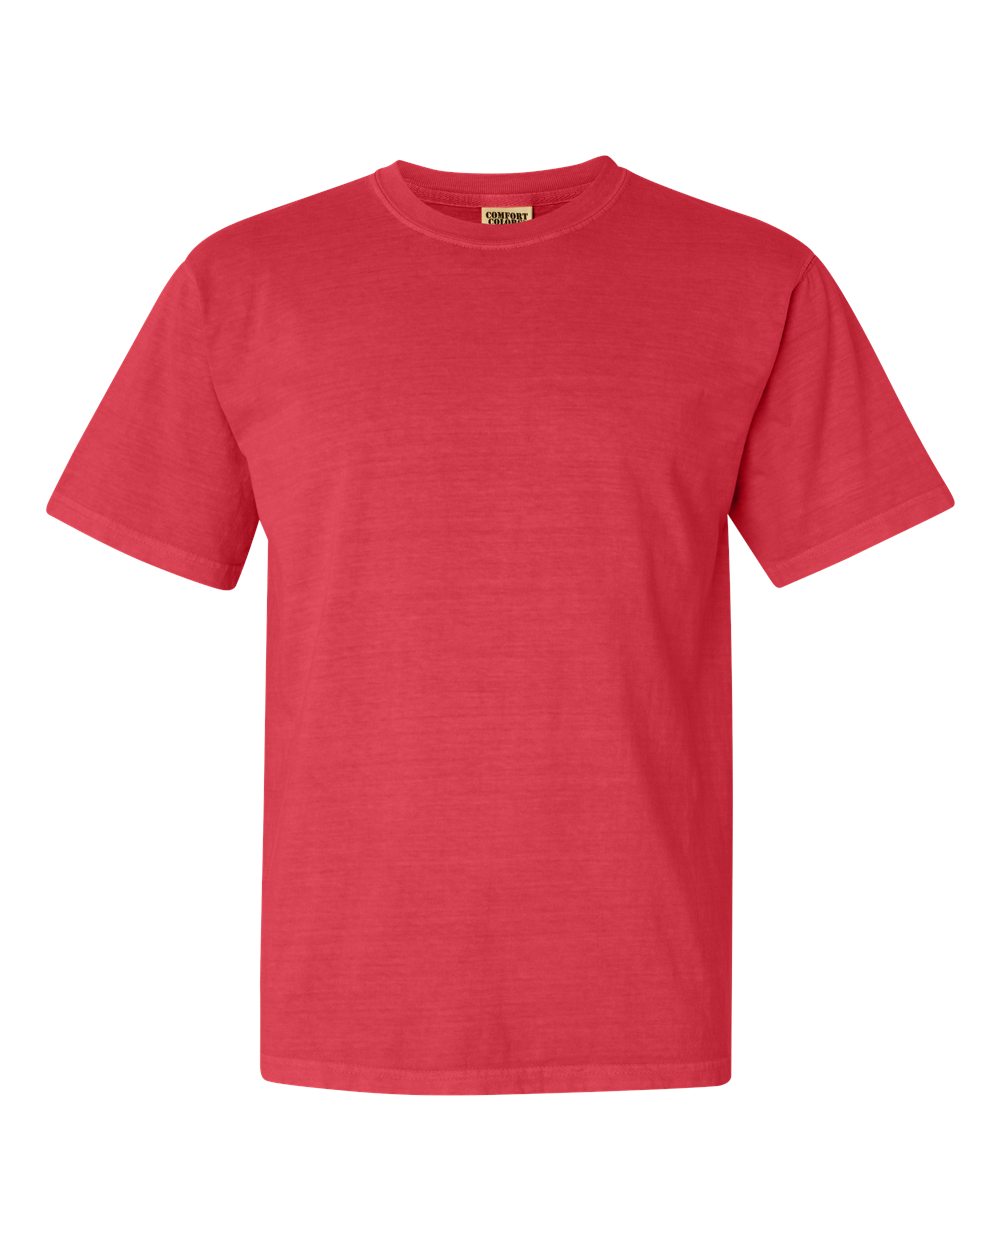 Comfort Colors Garment-Dyed Tee (1717) in Watermelon